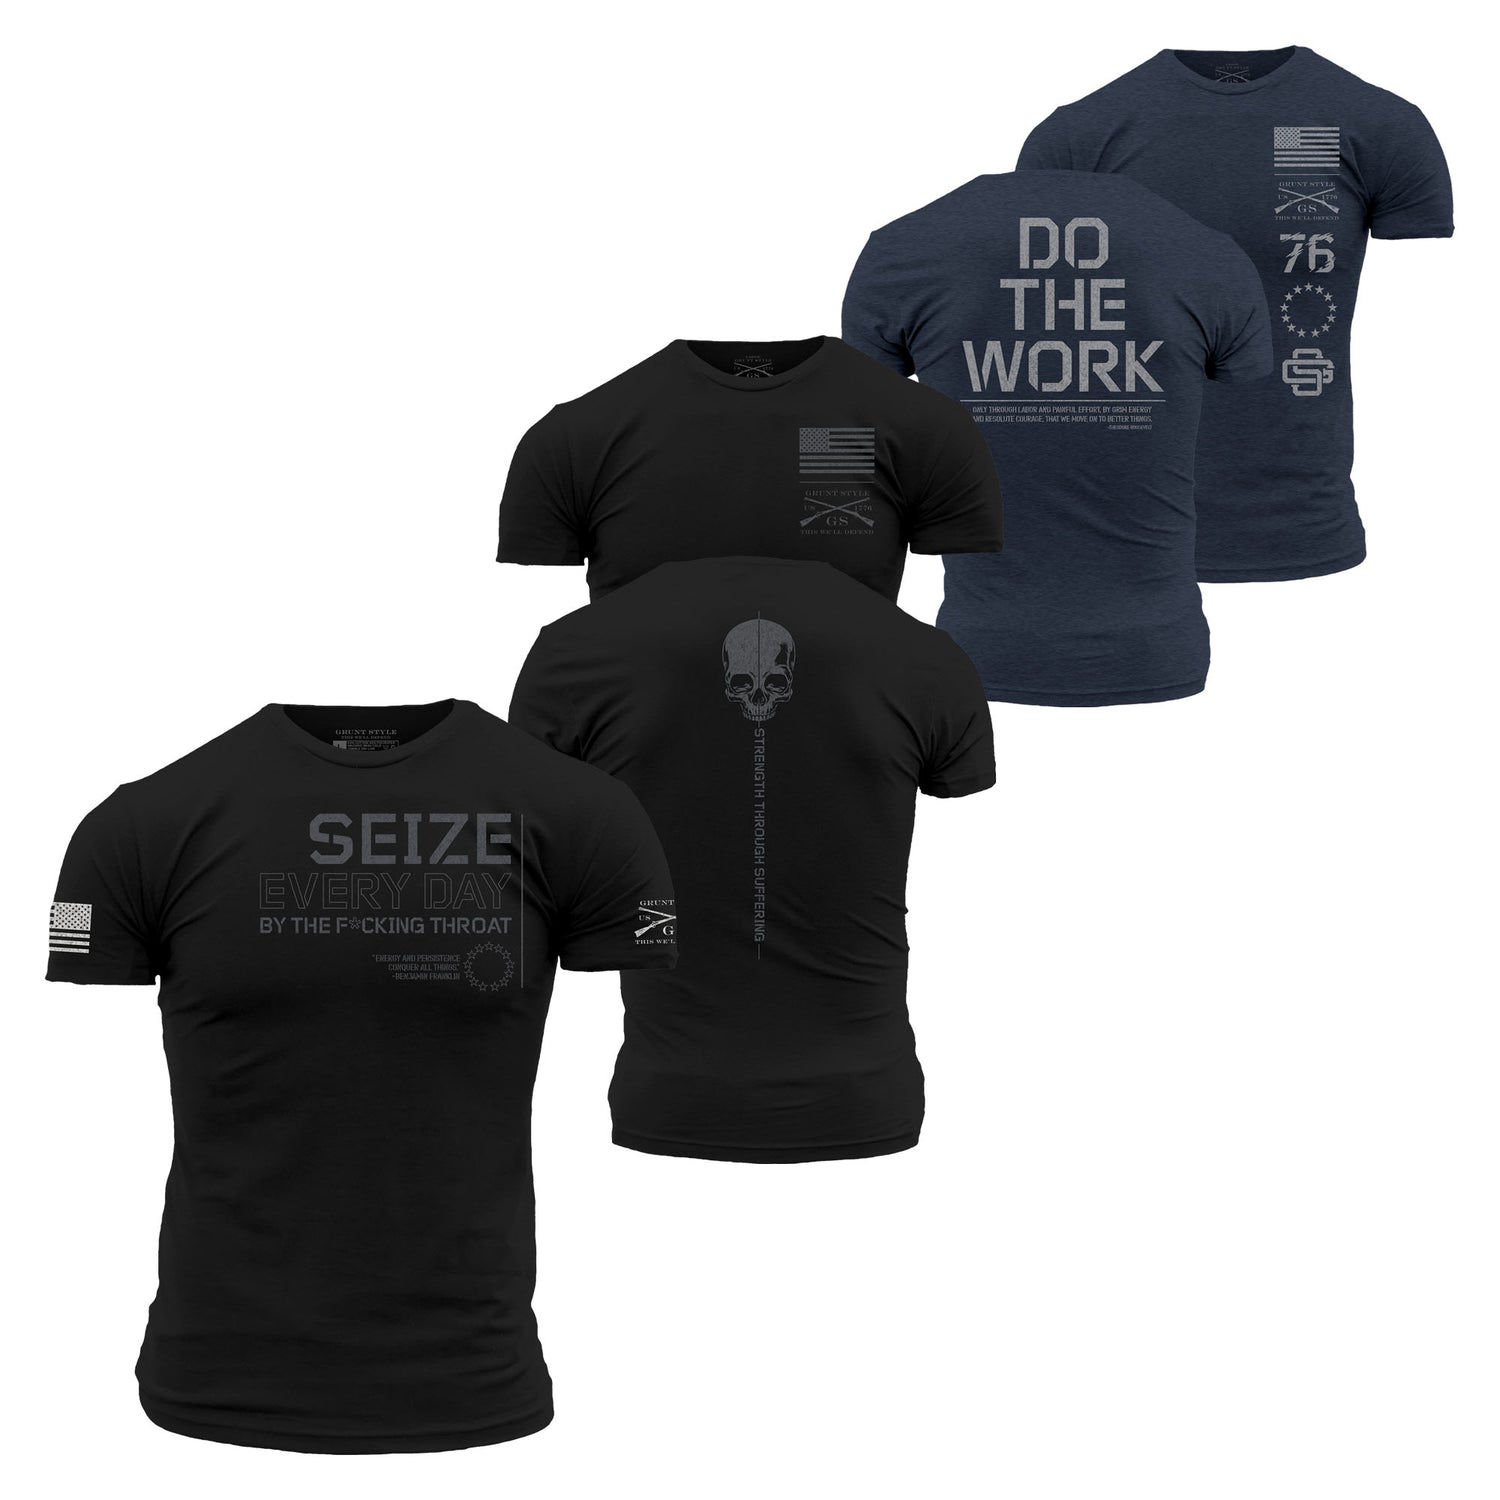 3 Pack of Workout Shirts 